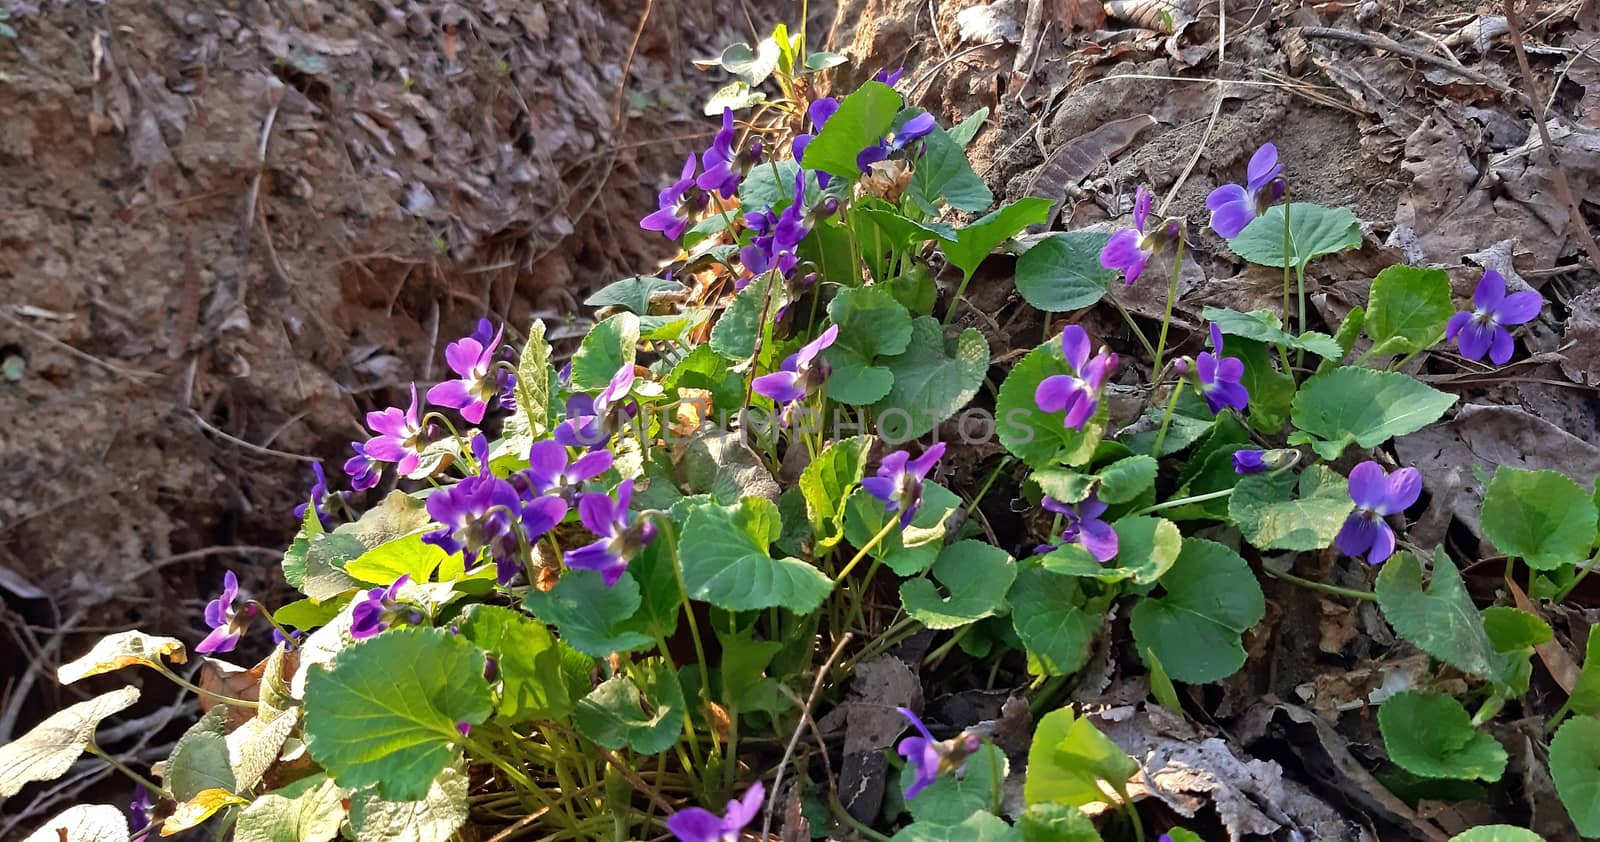 Fragrant violets in bloom in the spring by Mindru